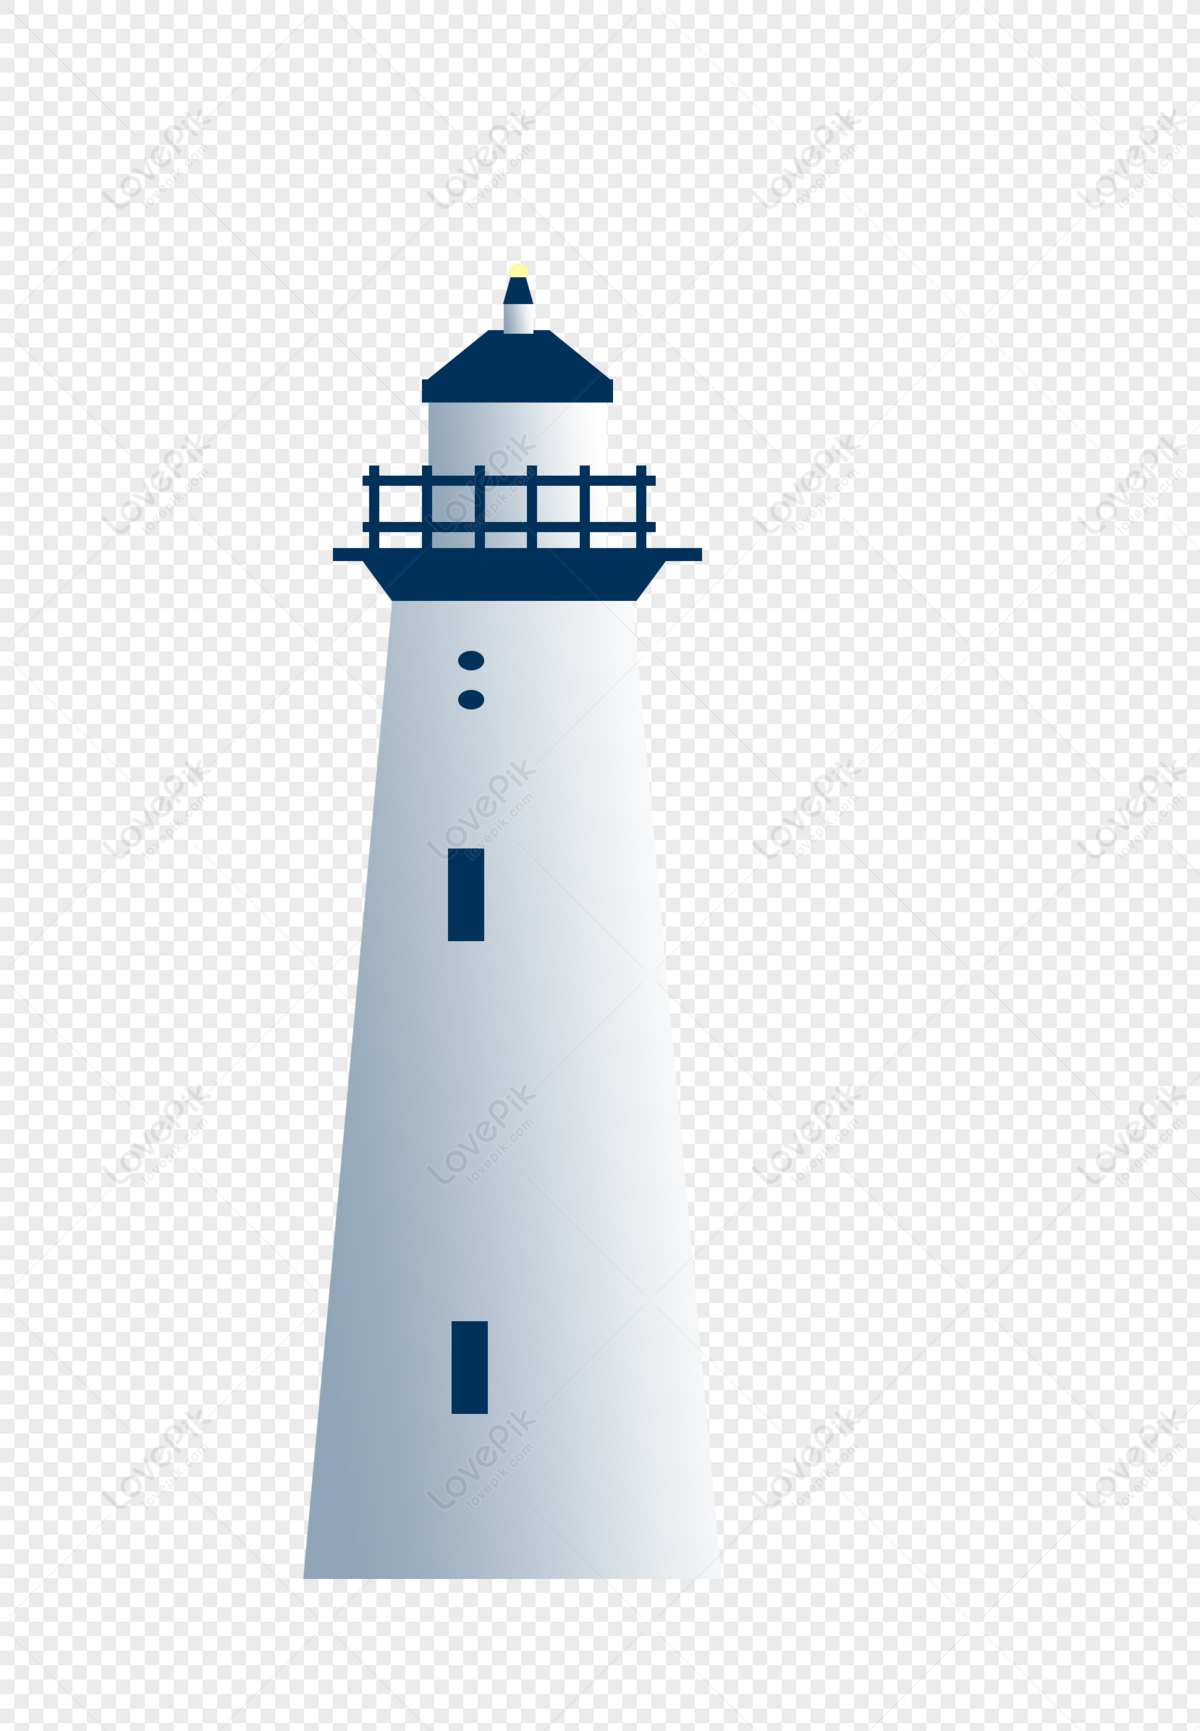 White Lighthouse PNG Free Download And Clipart Image For Free Download -  Lovepik | 401149983